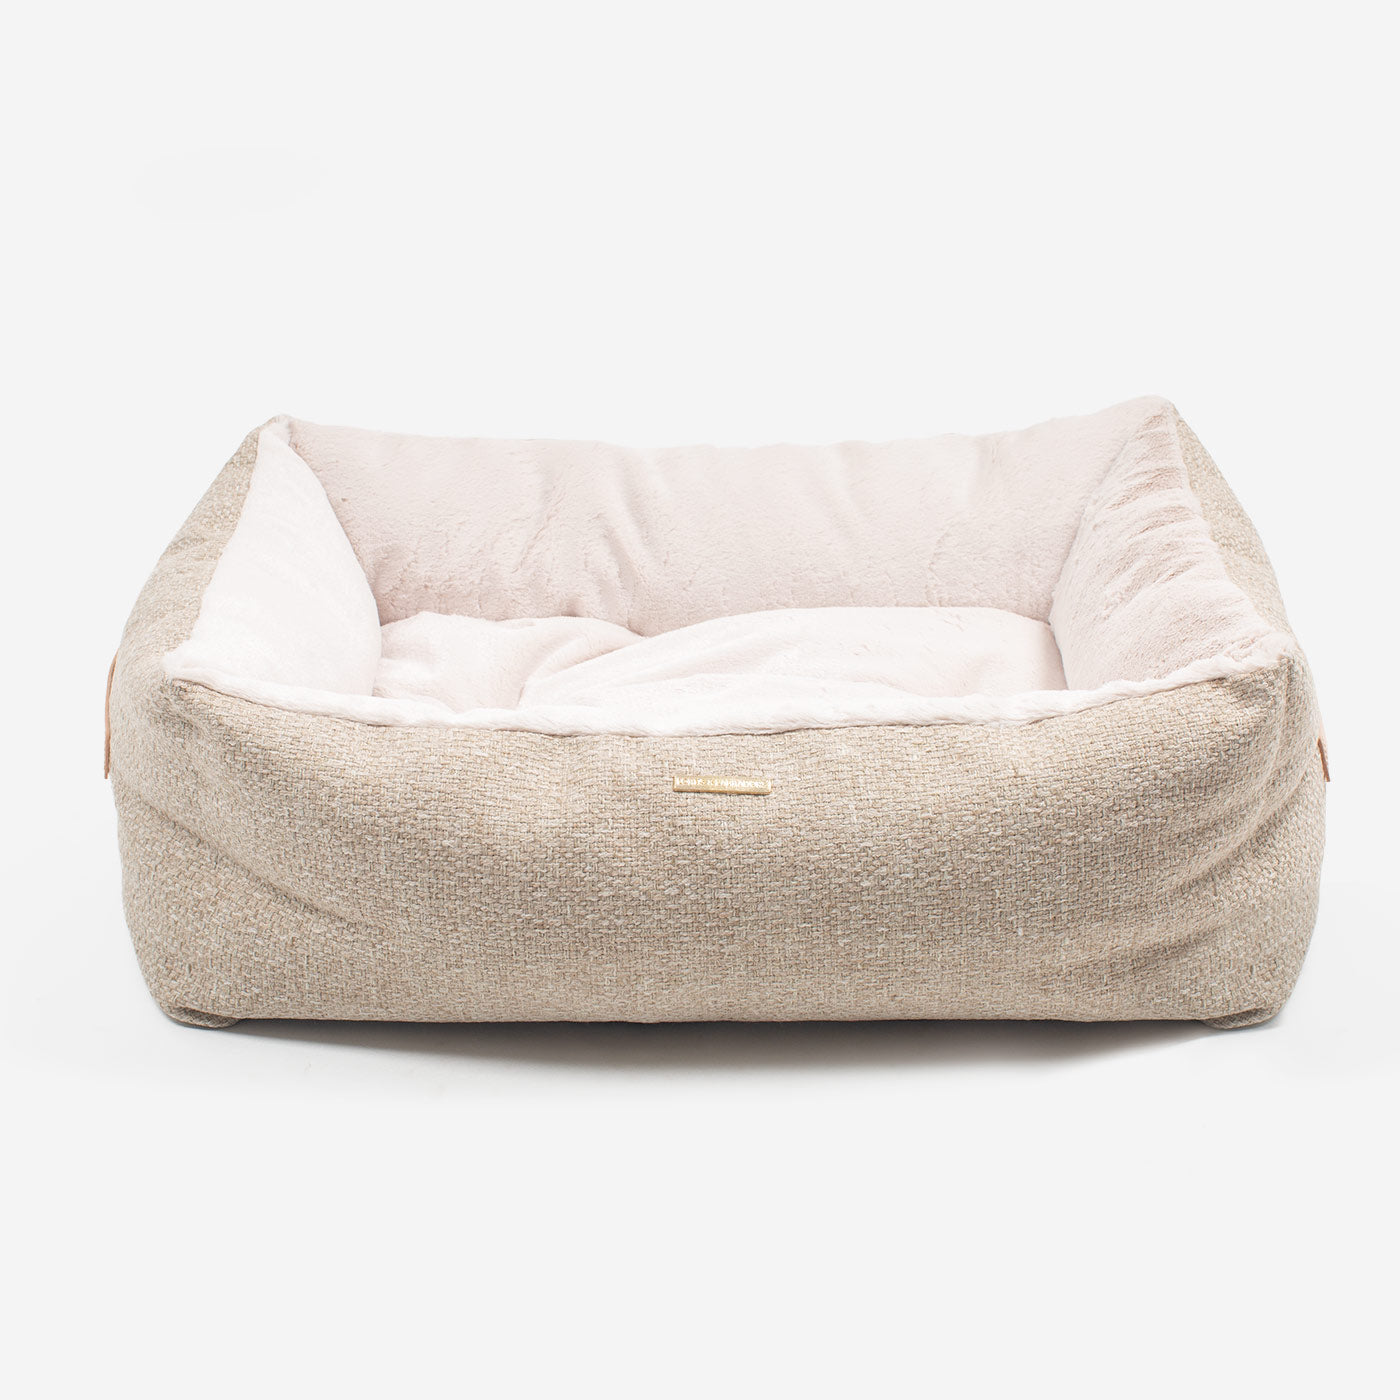 Discover This Luxurious Box Bed For Dogs, Made Using Beautiful Herdwick Fabric To Craft The Perfect Dog Box Bed! In Stunning Sandstone, Available Now at Lords & Labradors    